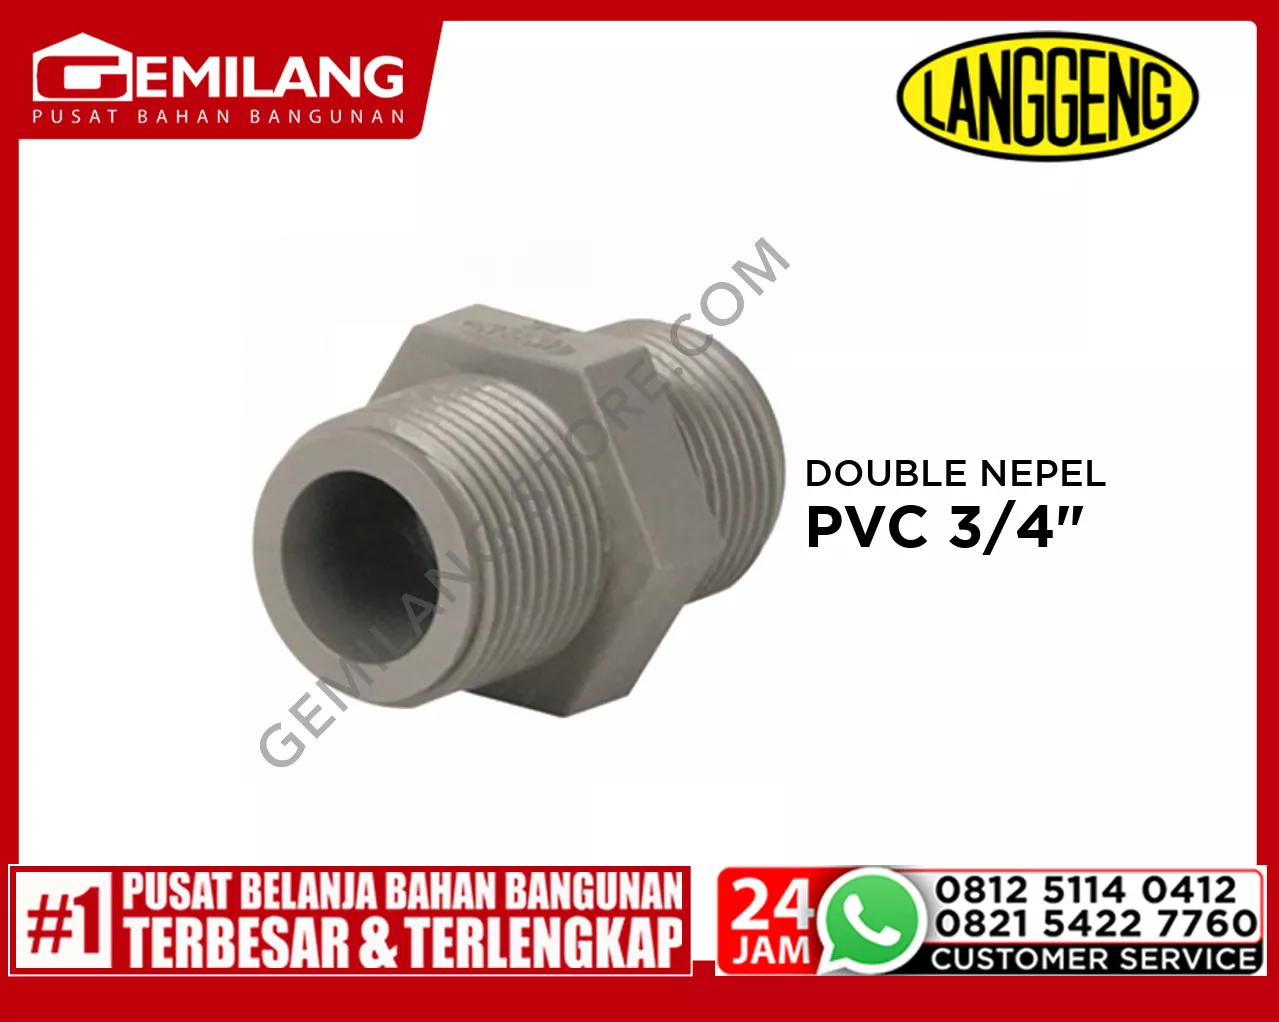 LANGGENG DOUBLE NEPEL PVC 3/4inch